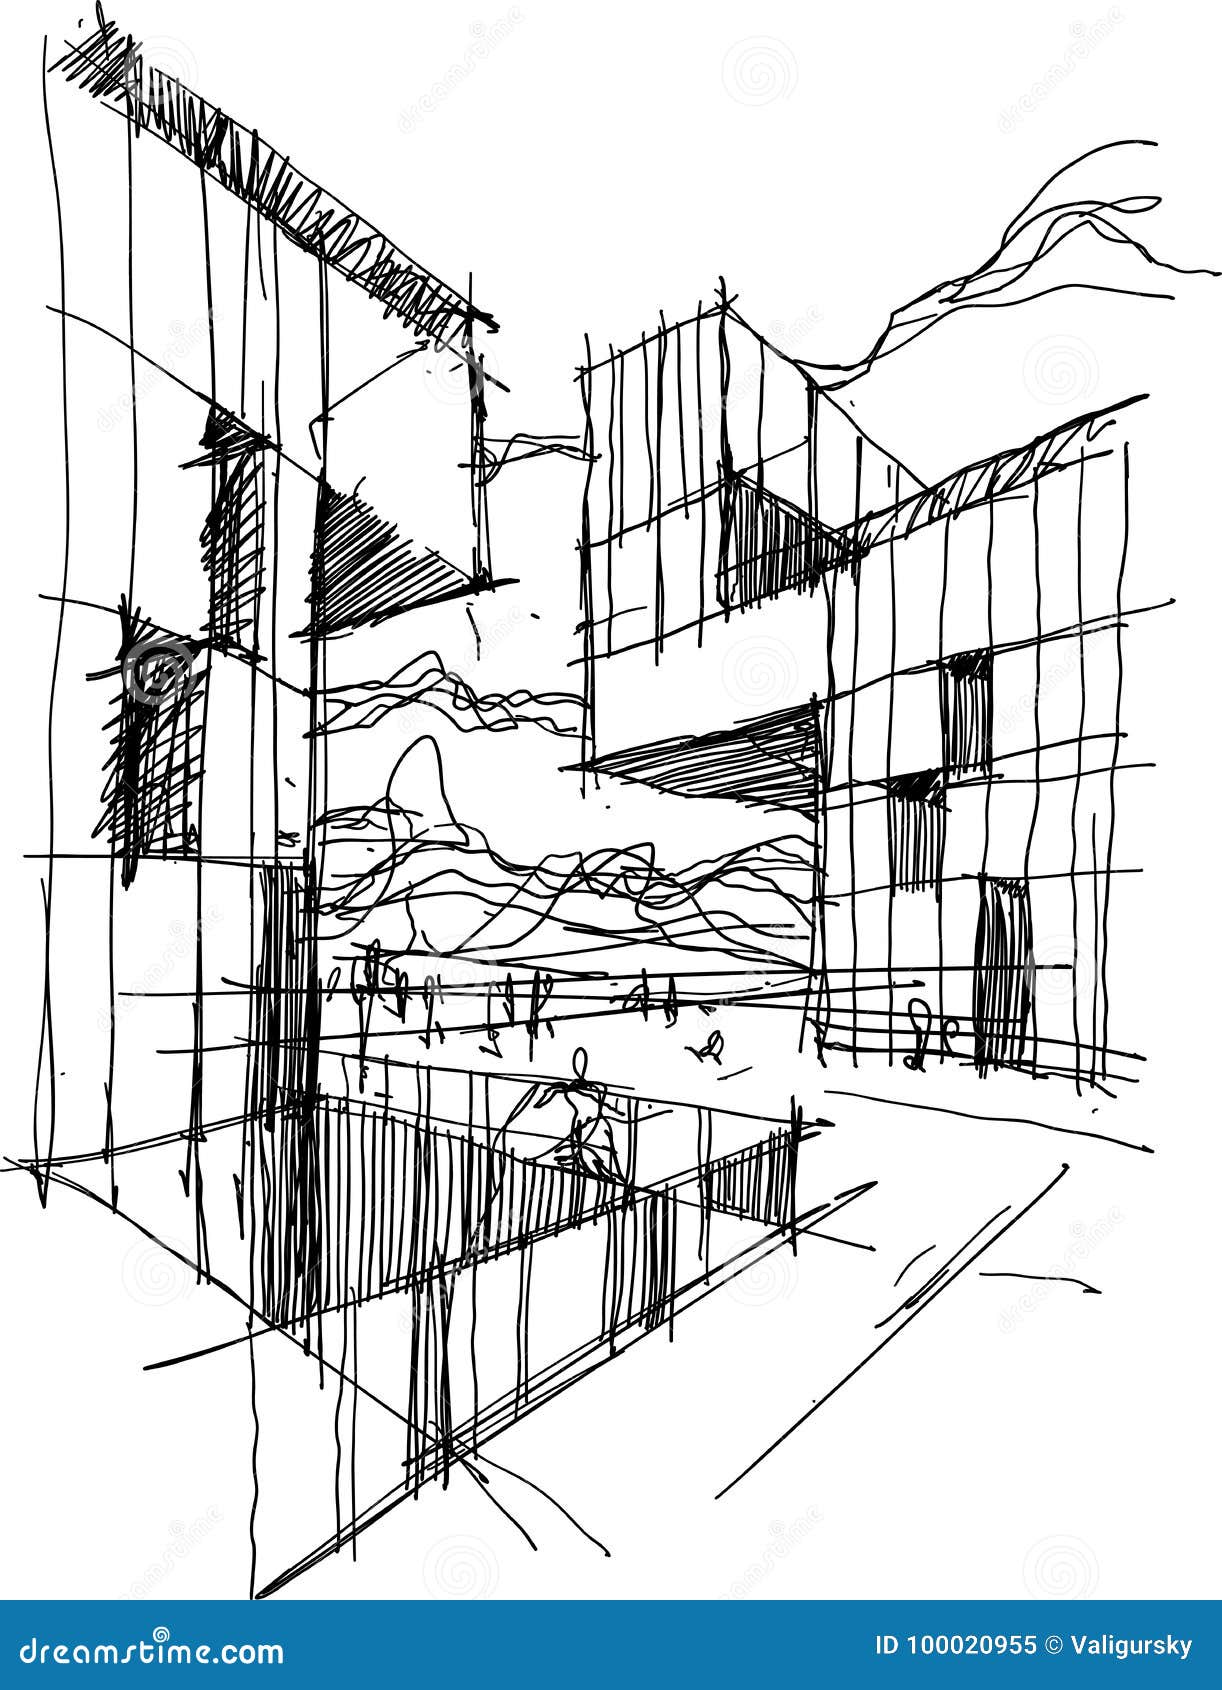 Architecture Abstract Drawing - Drawing.rjuuc.edu.np